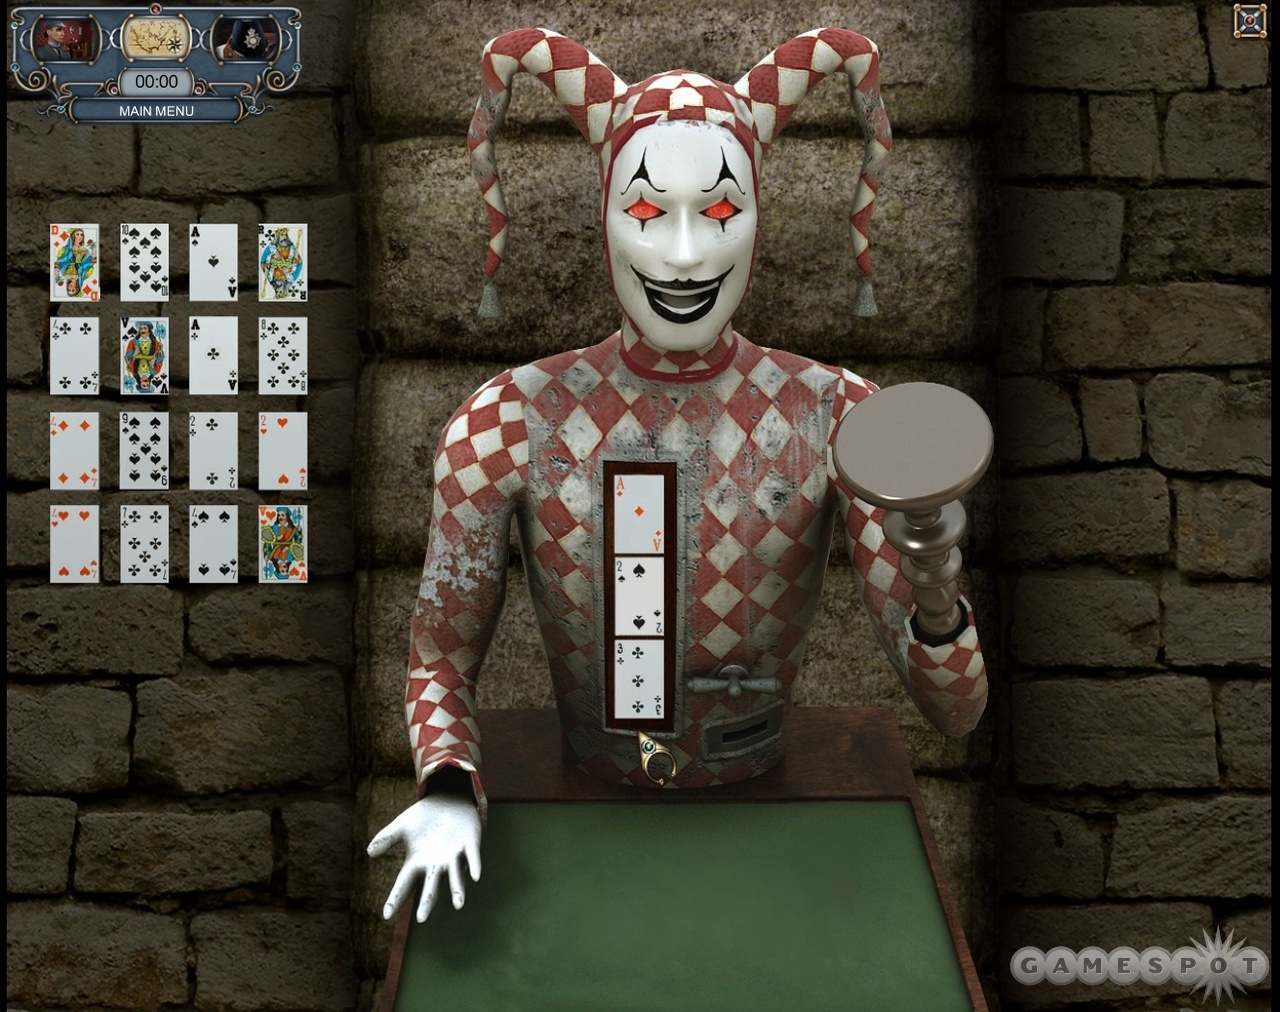 This joker card puzzle is creepy and challenging.